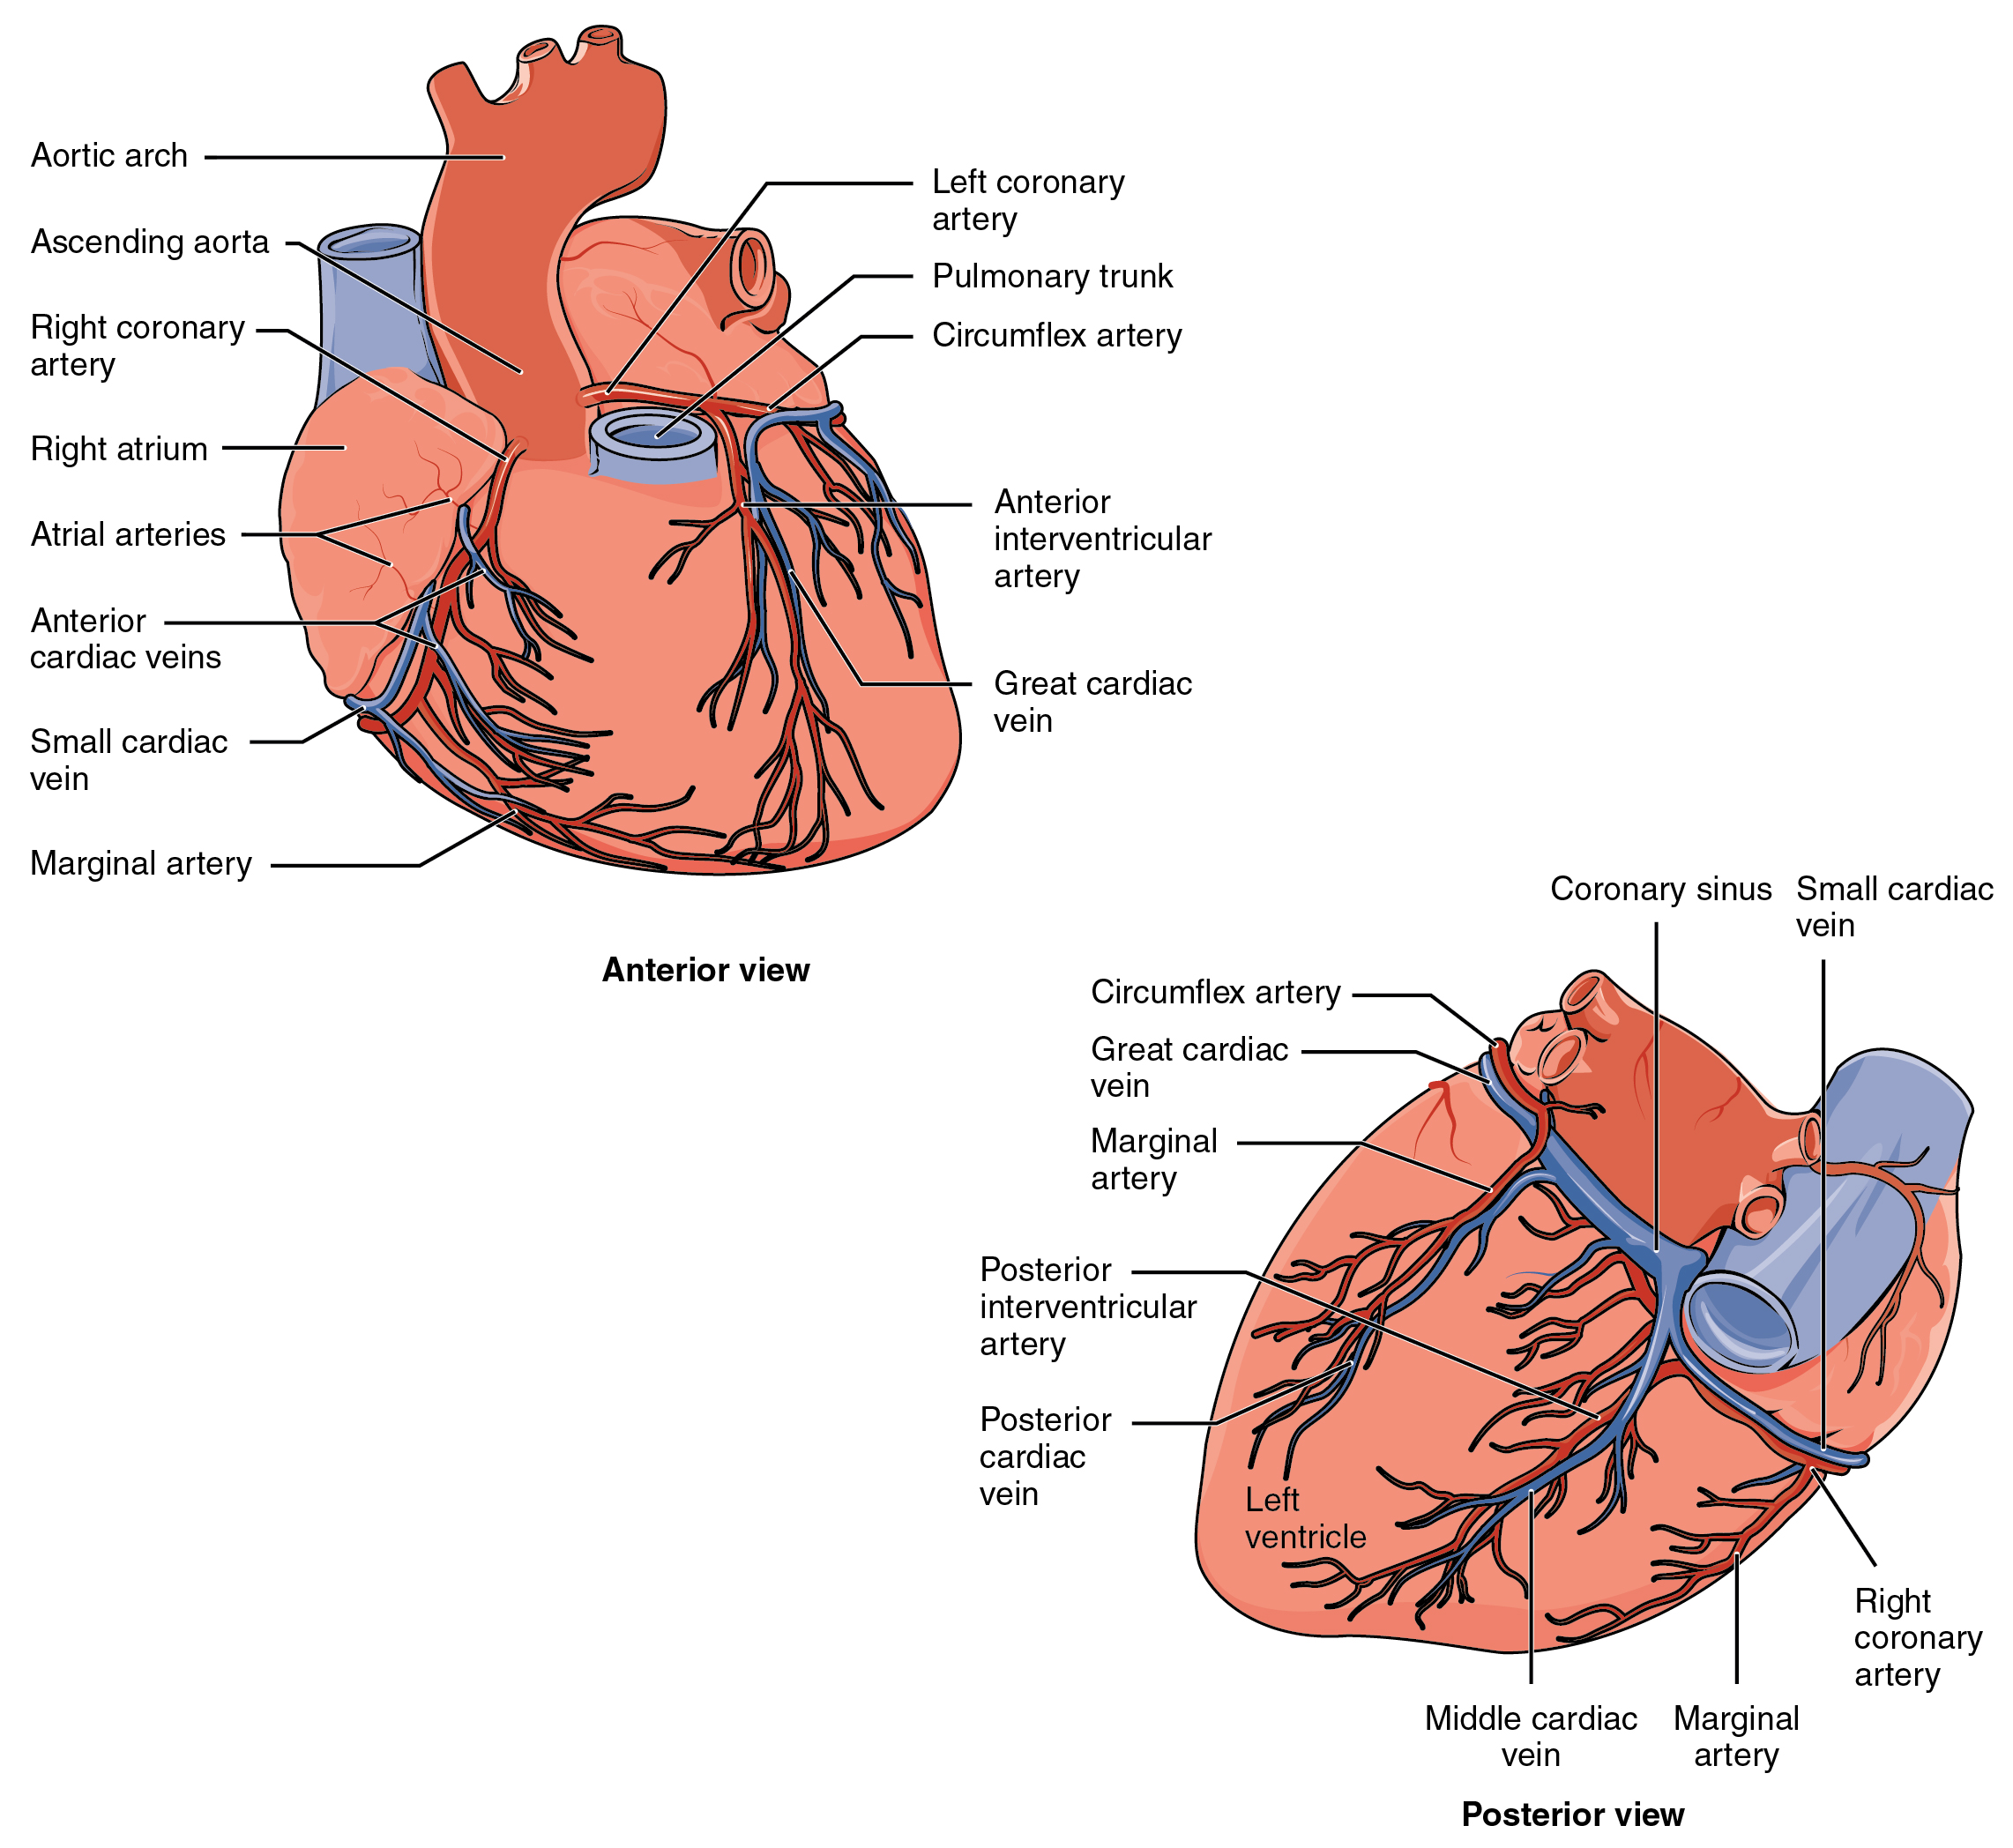 Anterior and posterior views of the heart and its blood vessels. Image description available.